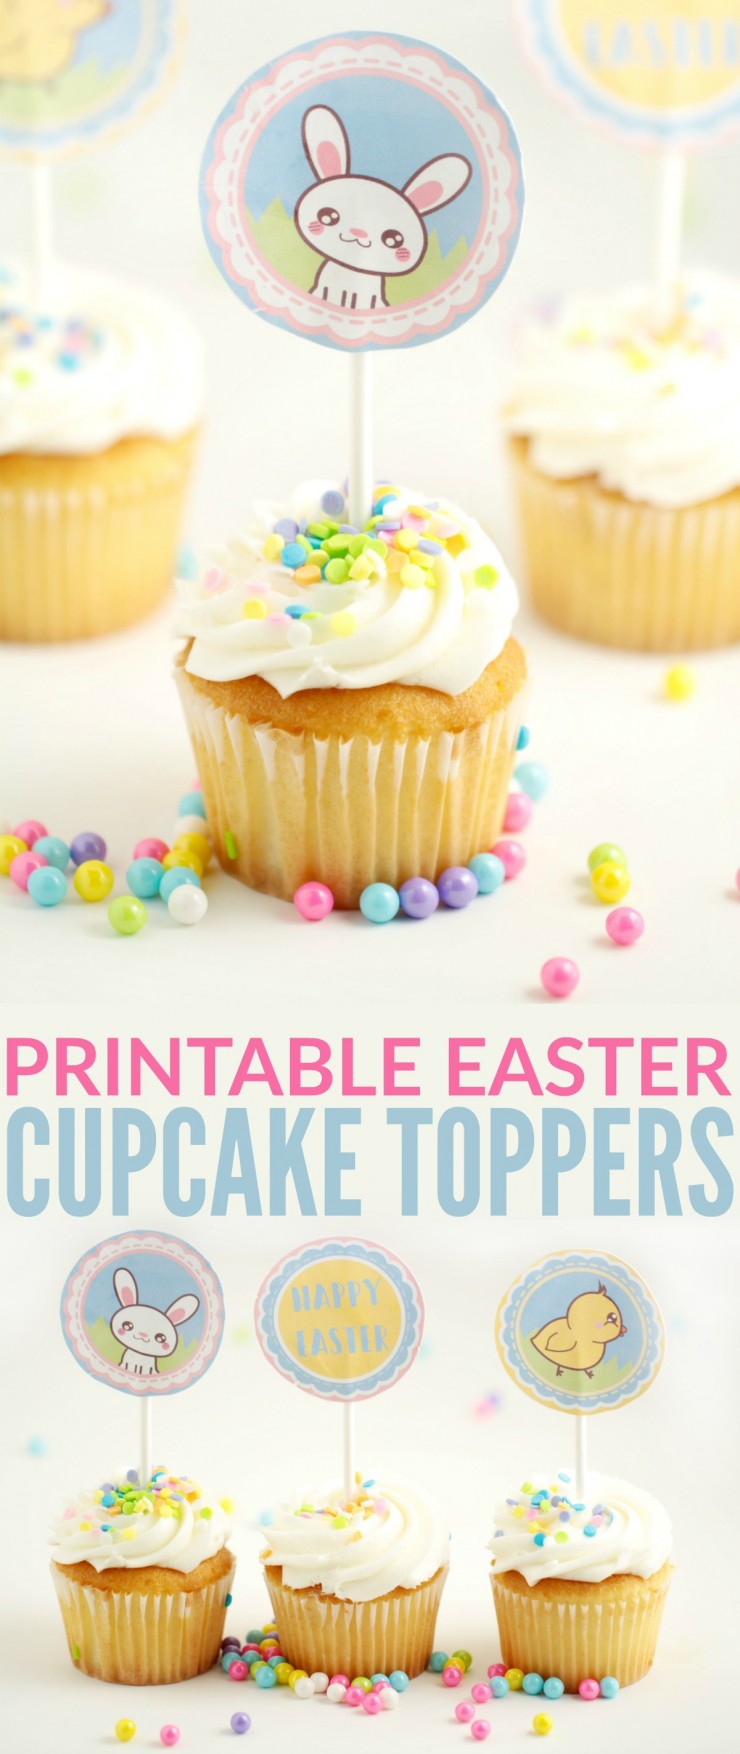 These Printable Easter Cupcake Toppers are super cute, I love the sweet chick and bunny characters. They are perfect little cupcake toppers for Easter cupcakes!